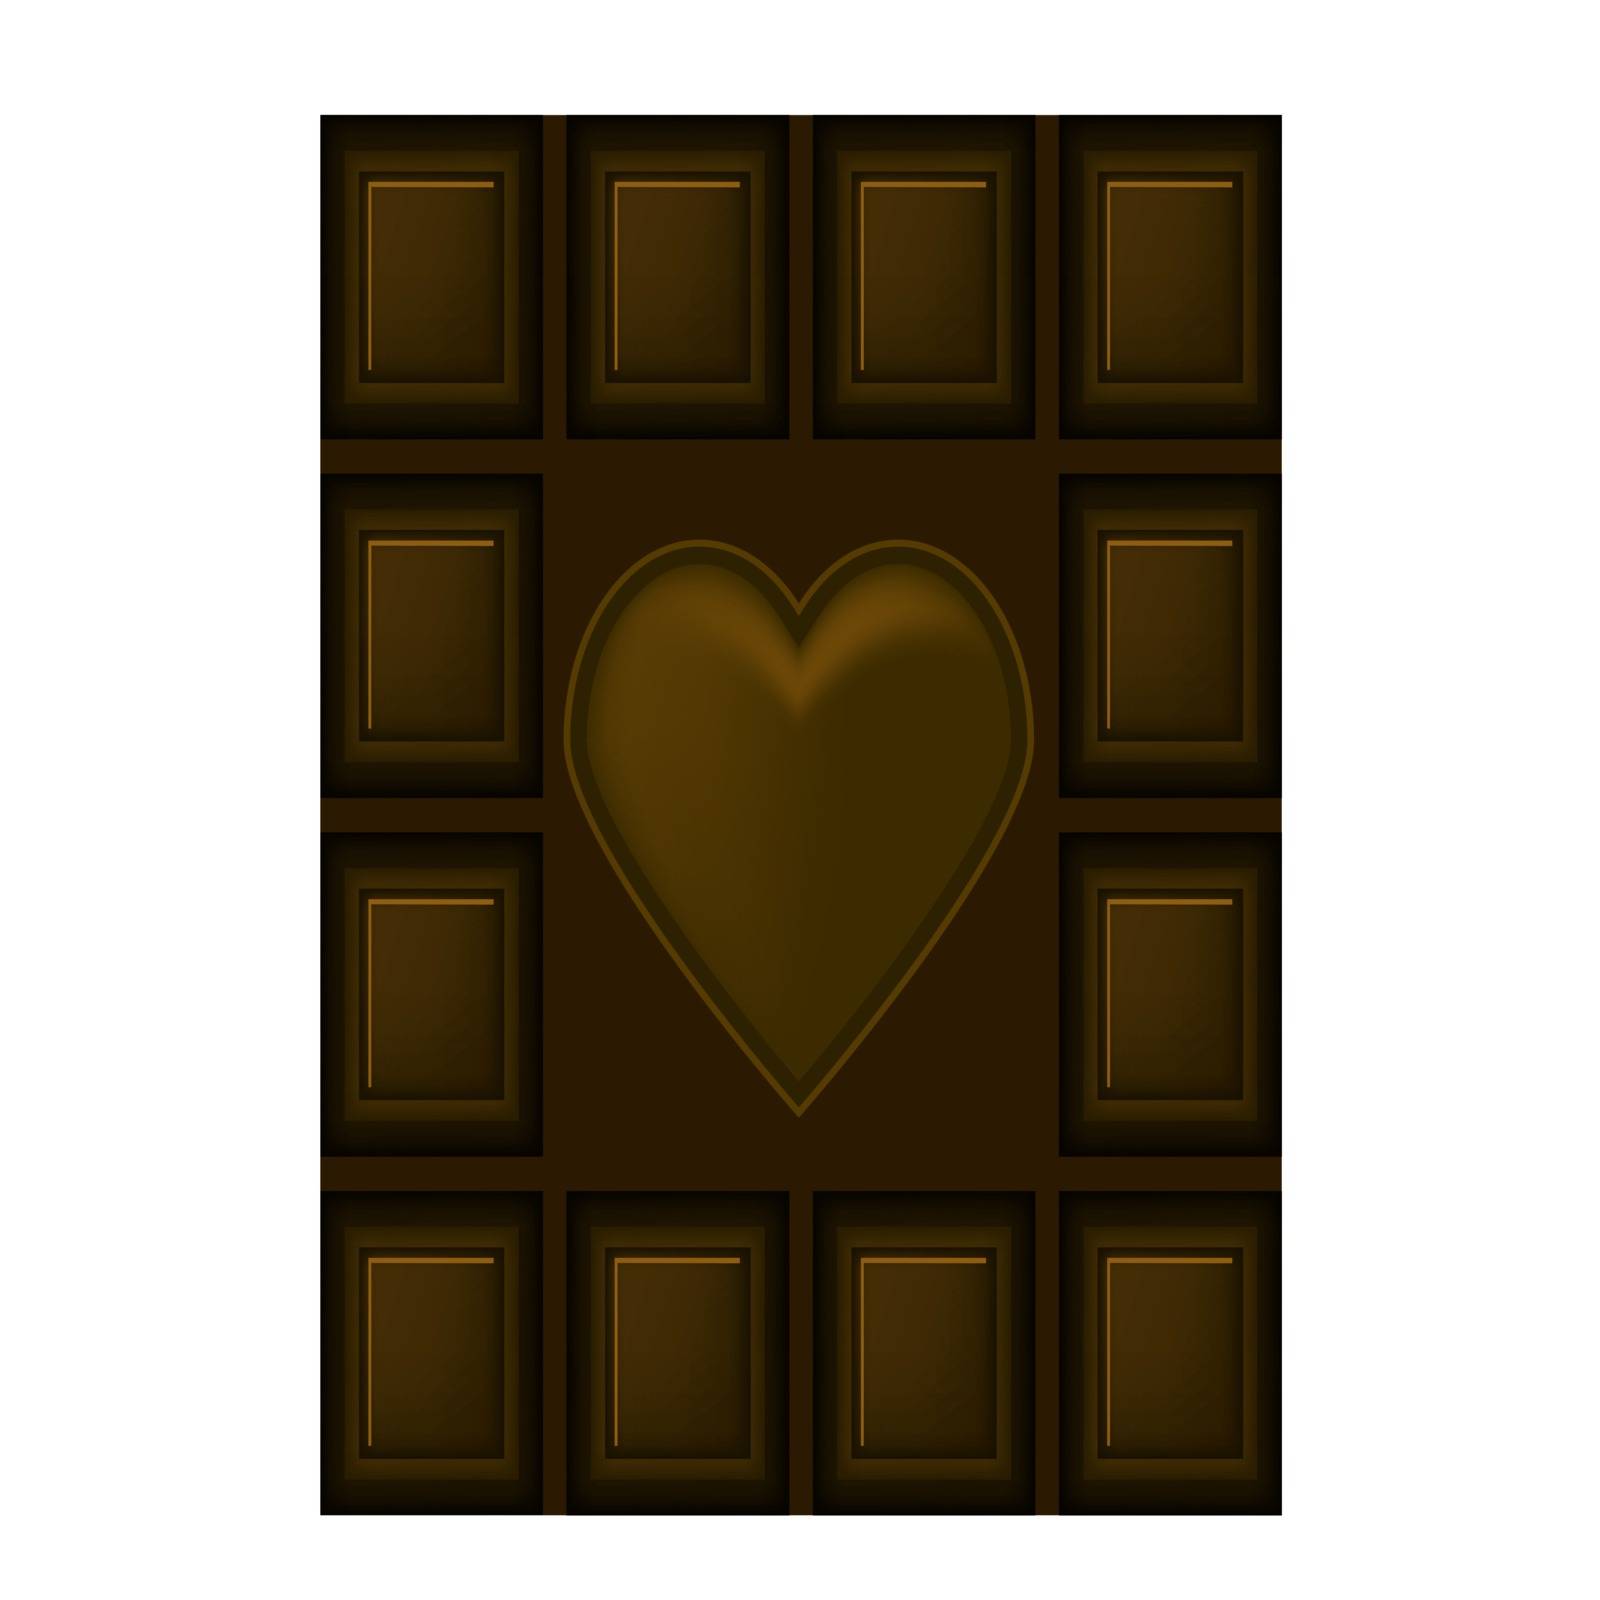 Chocolate Bar With Heart Isolated on White Background